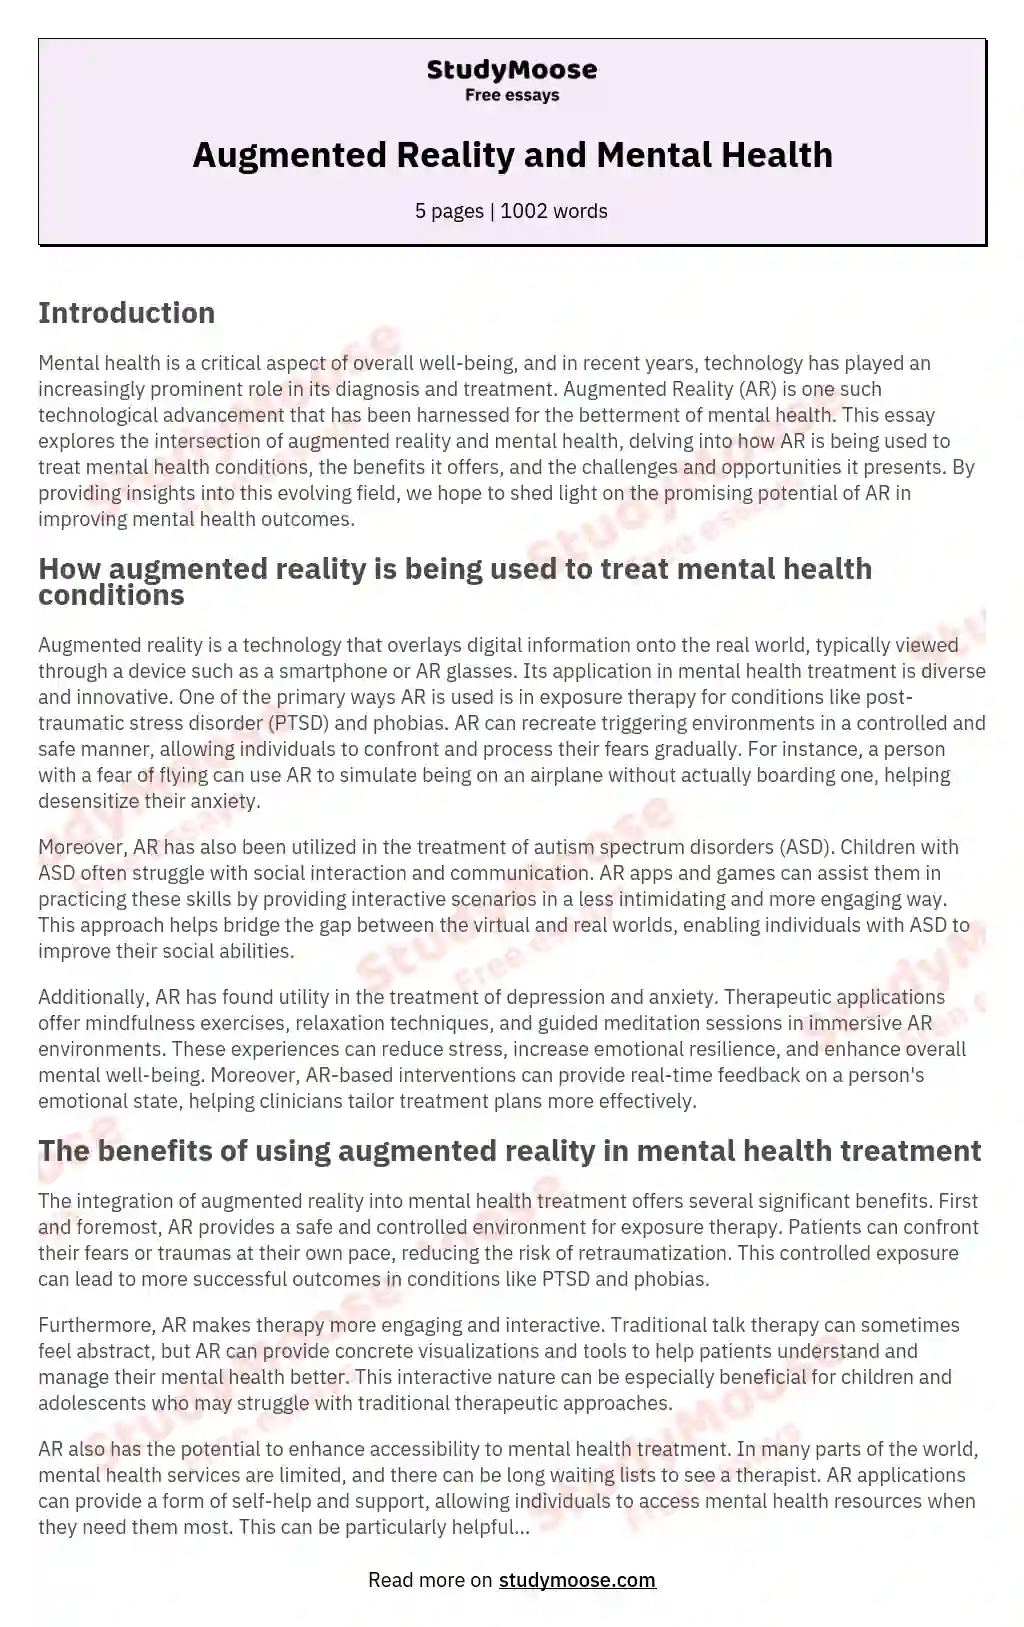 Augmented Reality and Mental Health essay